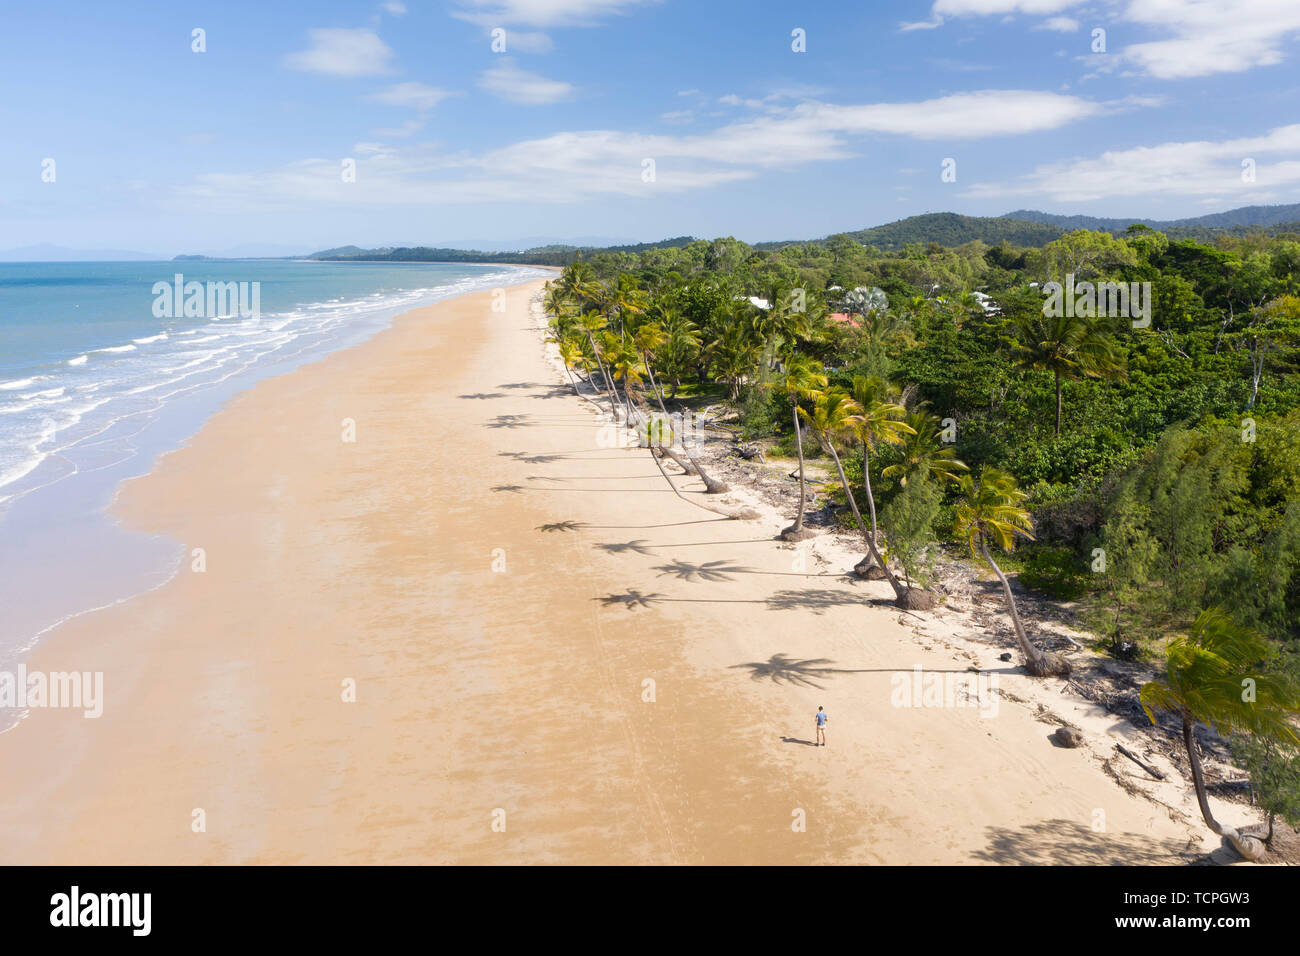 Aerial top view of beach with white sand, beautiful palm trees and warm turquoise tropical water in tropical paradise island, tropics Stock Photo